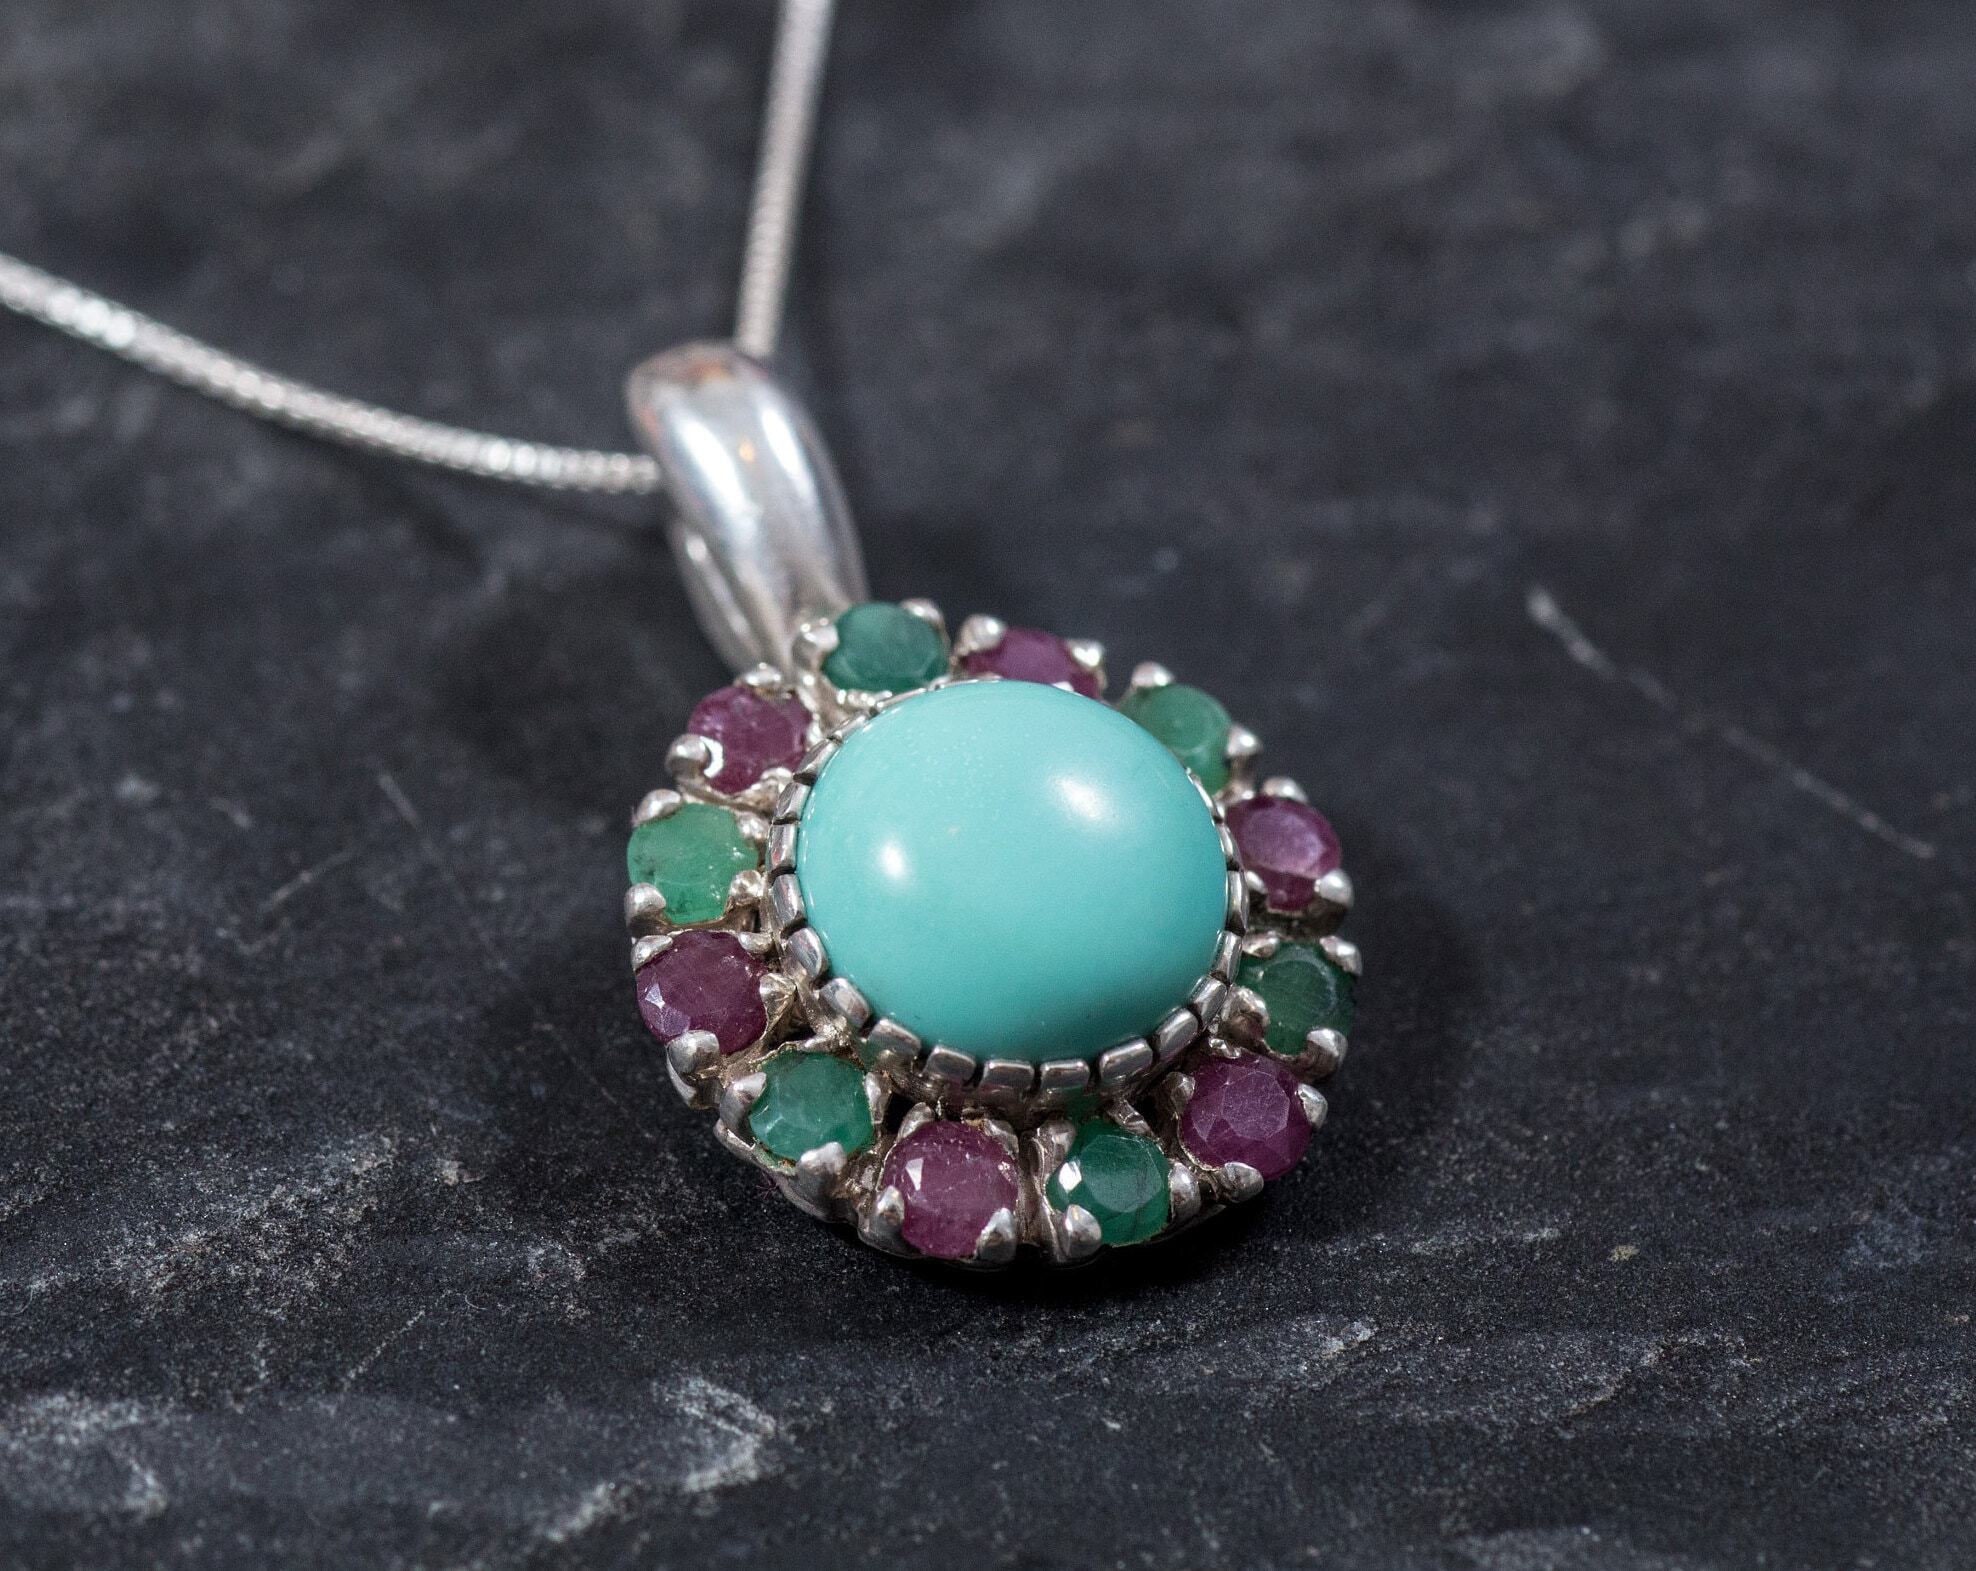 Turquoise Pendant, Natural Turquoise, Victorian Pendant, Emerald Pendant, Ruby Pendant, December Birthstone, May Birthstone, Solid Silver